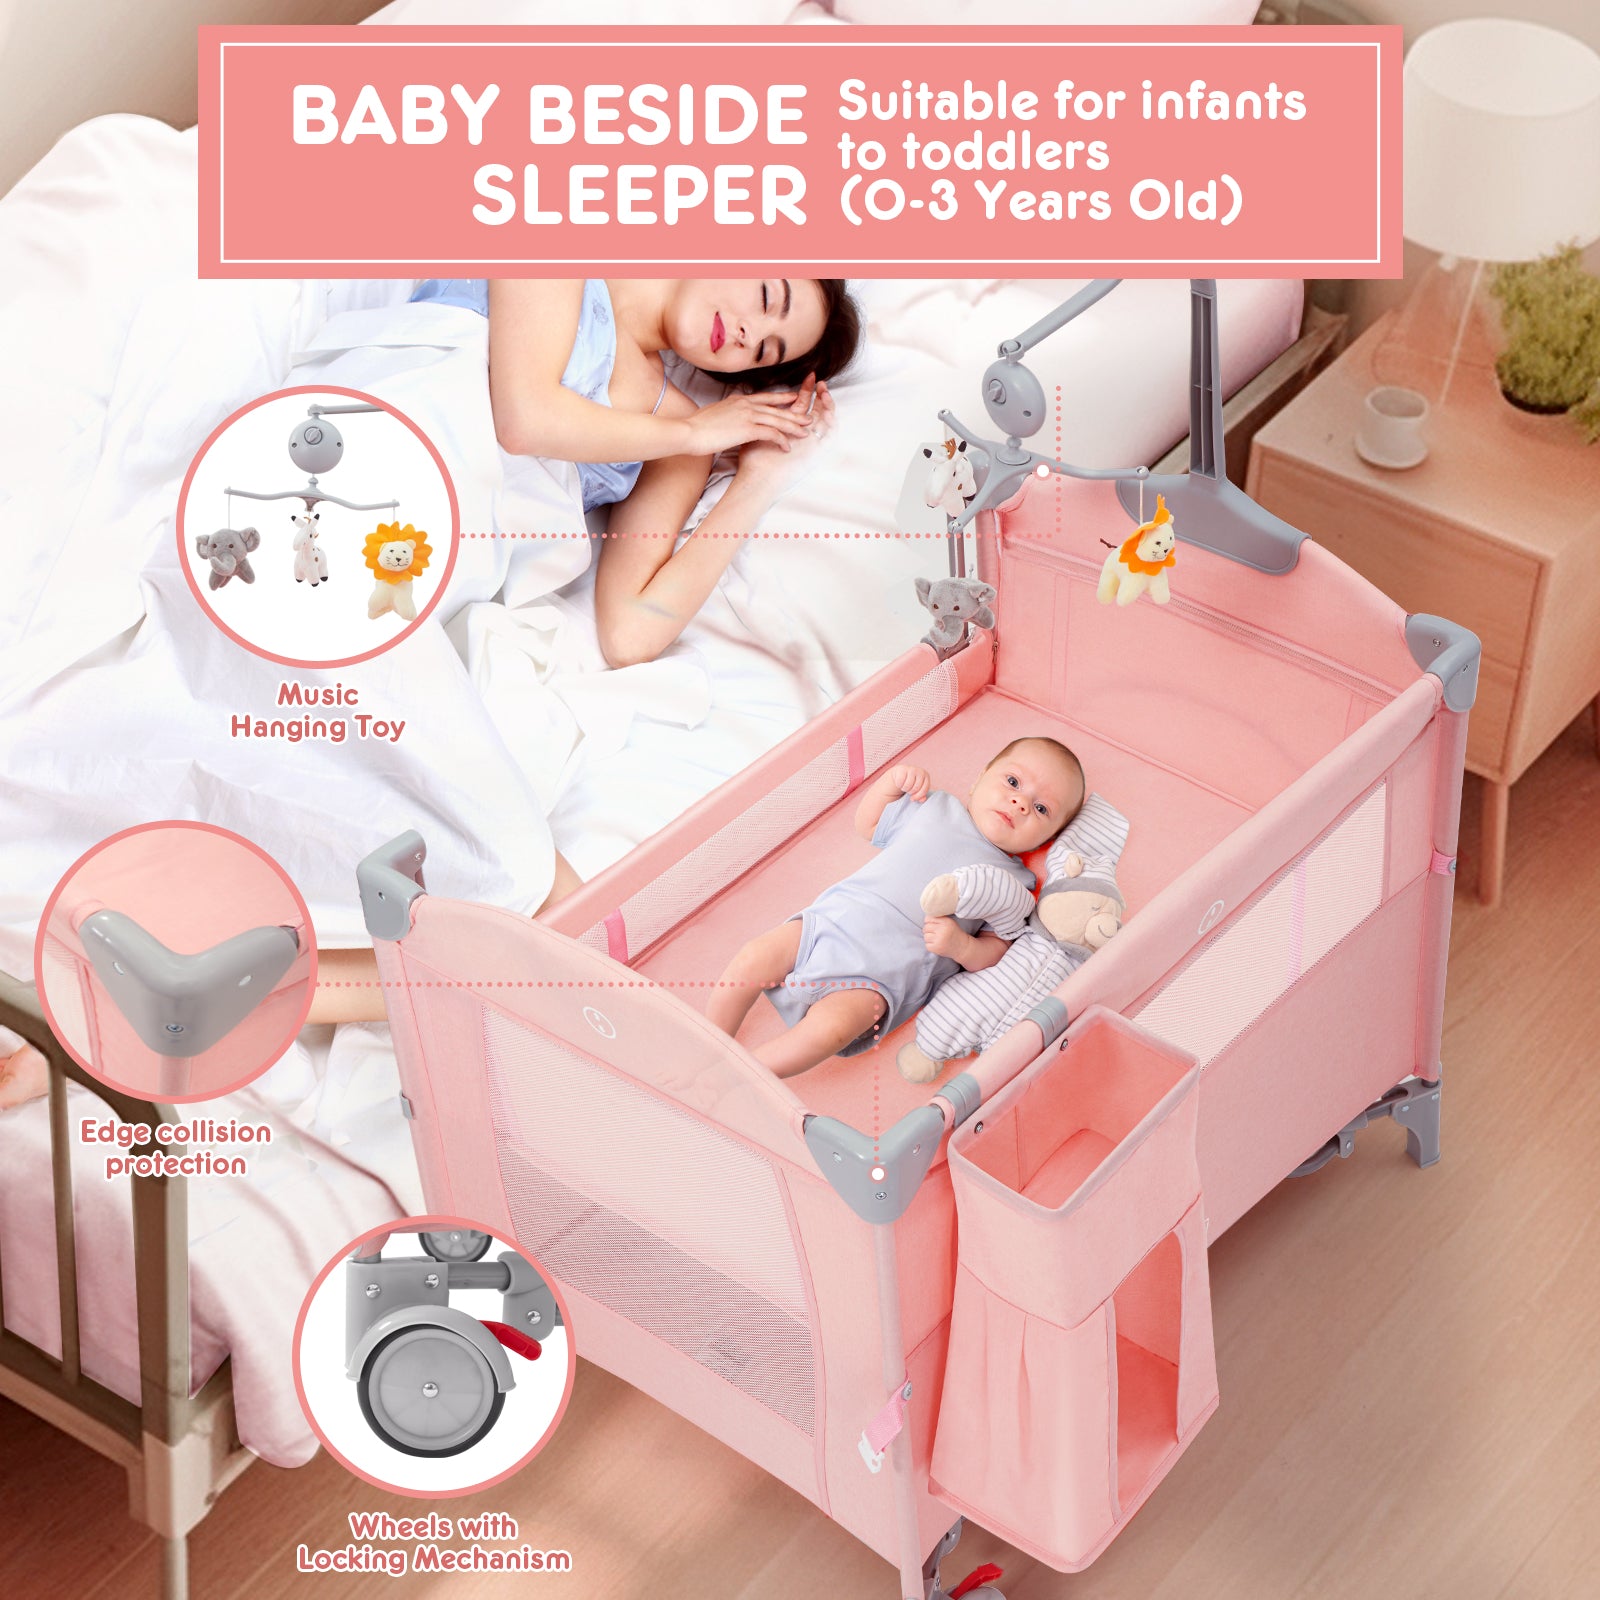 HARPPA 5-in-1 Pack and Play Baby Bassinet Bedside Crib